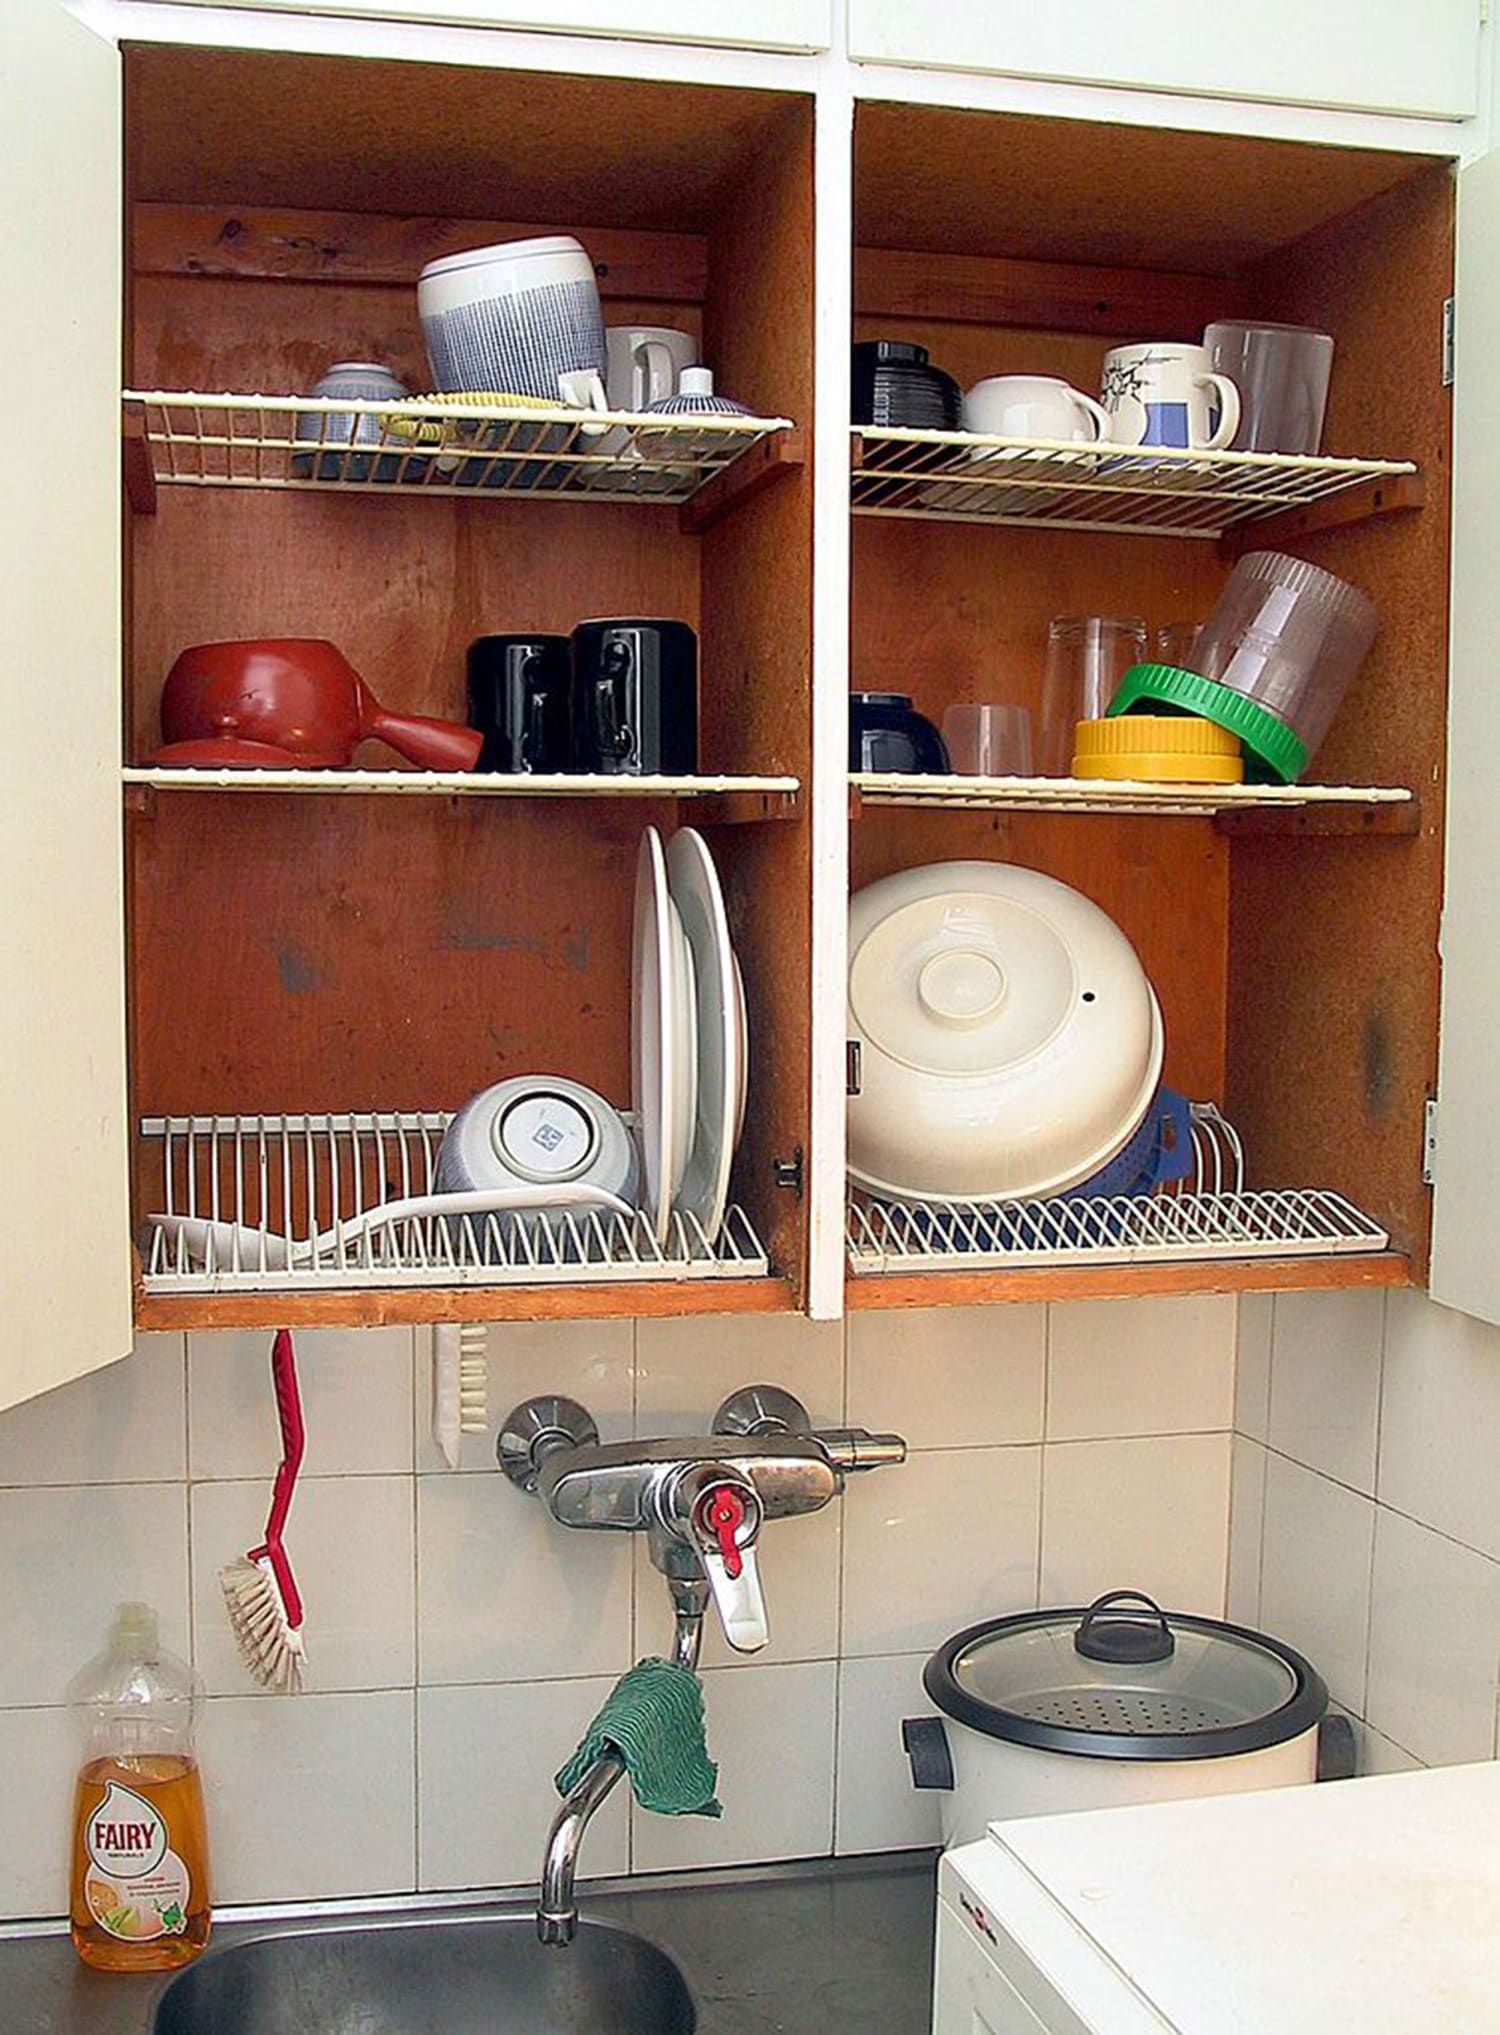 This Finnish Cleaning Method Will Change the Way You Dry Dishes